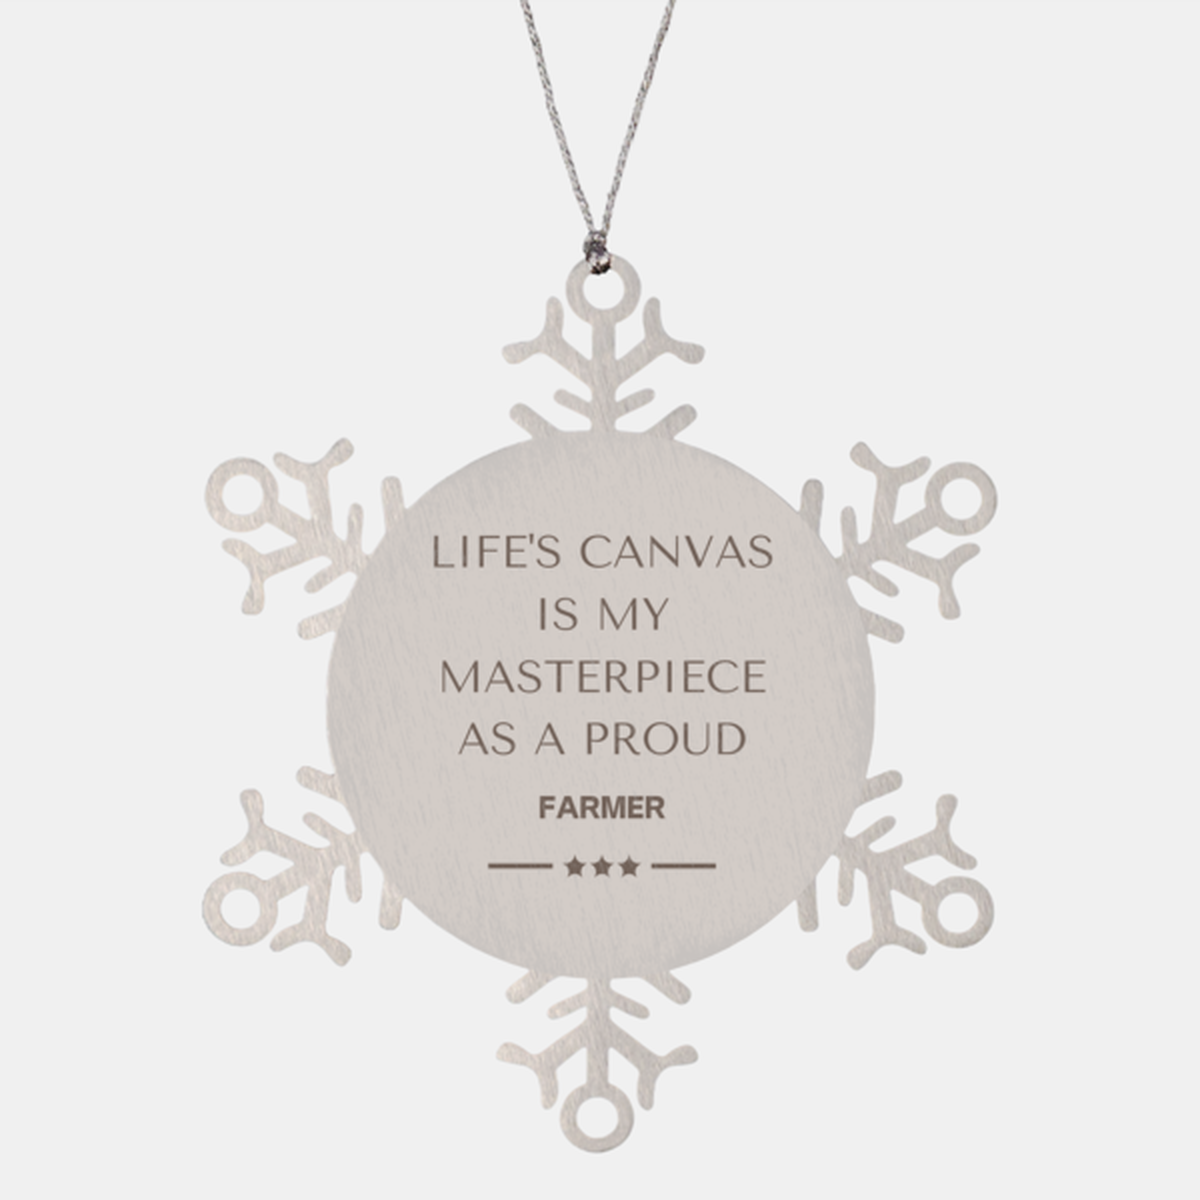 Proud Farmer Gifts, Life's canvas is my masterpiece, Epic Birthday Christmas Unique Snowflake Ornament For Farmer, Coworkers, Men, Women, Friends